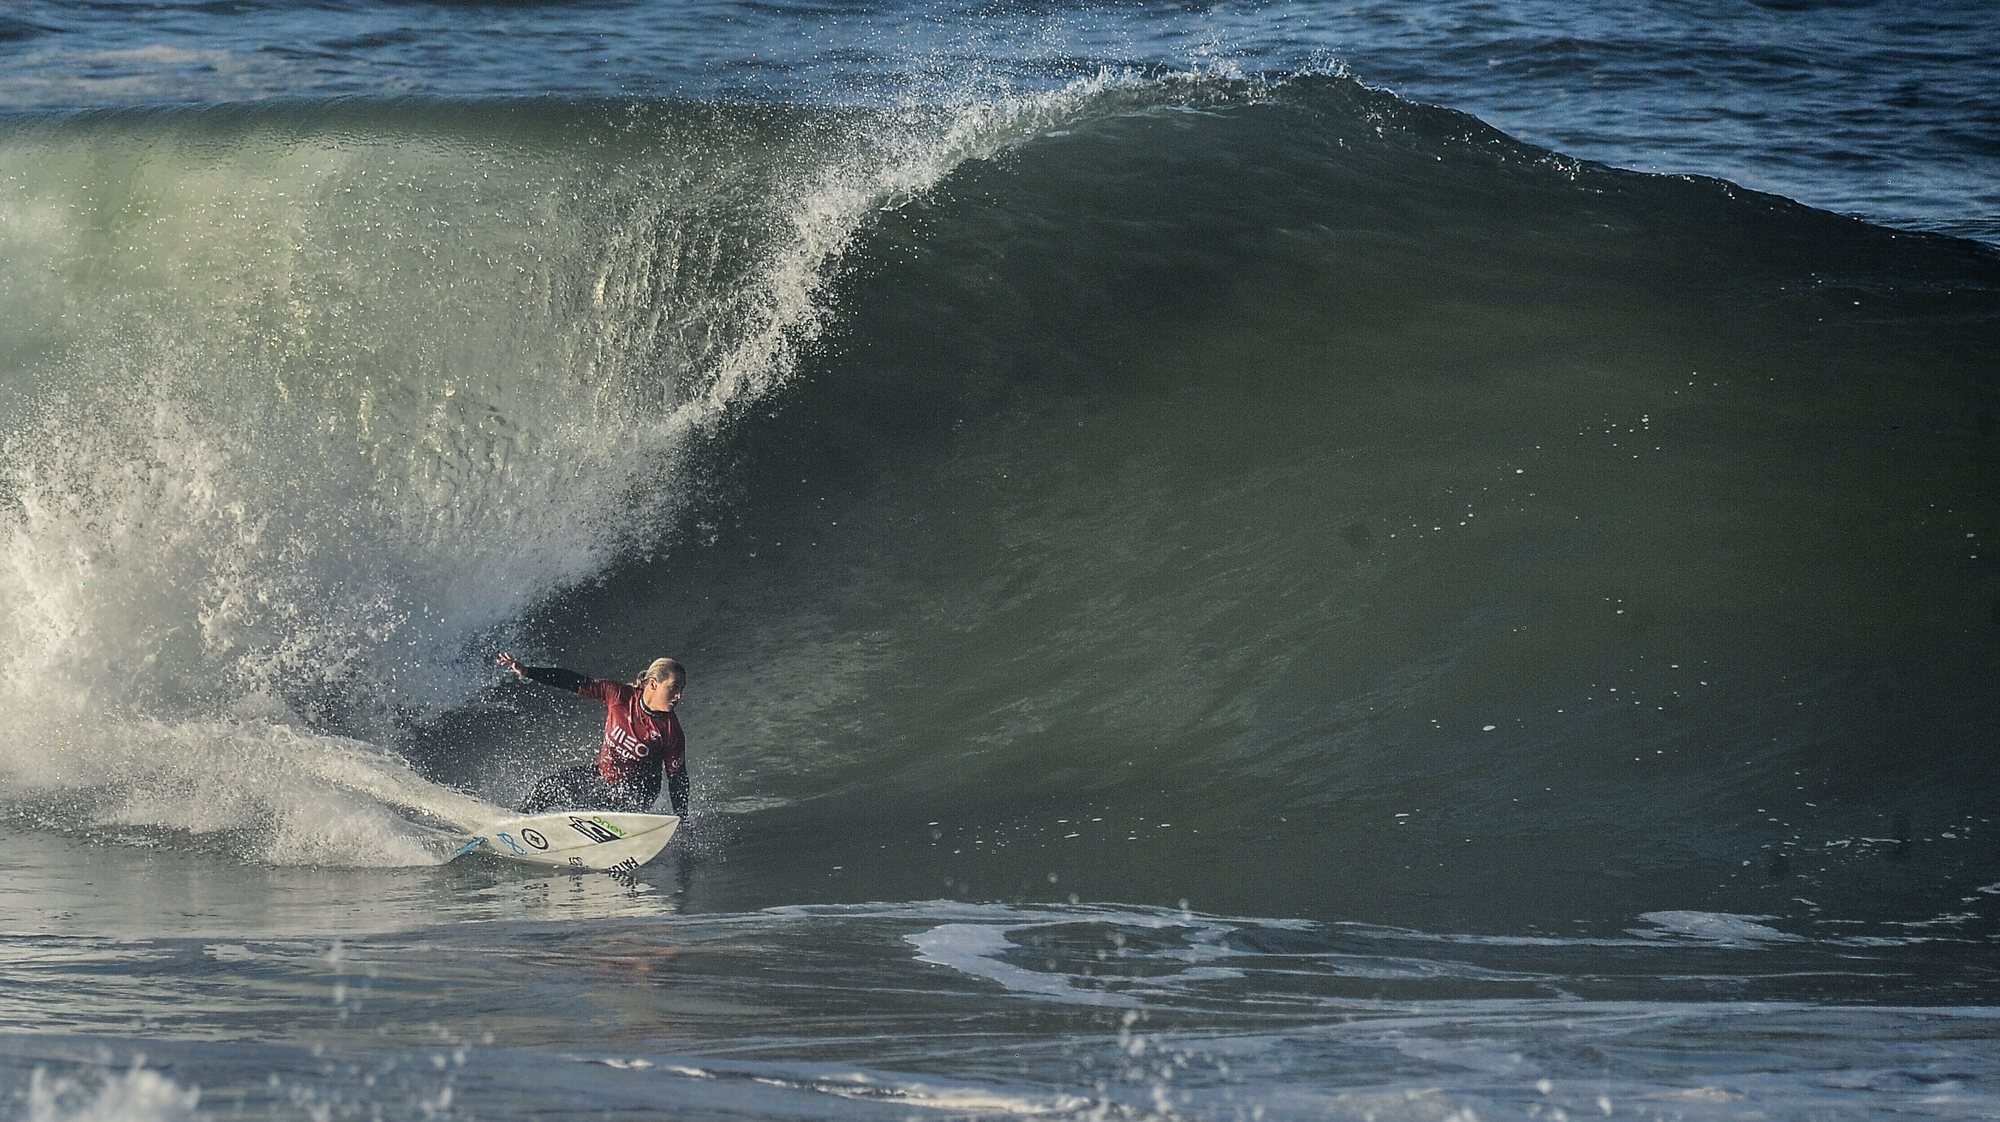 Portuguese surfer Yolanda Hopkins during the Meo Rip Curl Pro Portugal, the third stage of the world surfing circuit which takes place in Peniche until the 16th of March at the Super Tubos Beach, Peniche, 14 de march de 2023. CARLOS BARROSO/LUSA